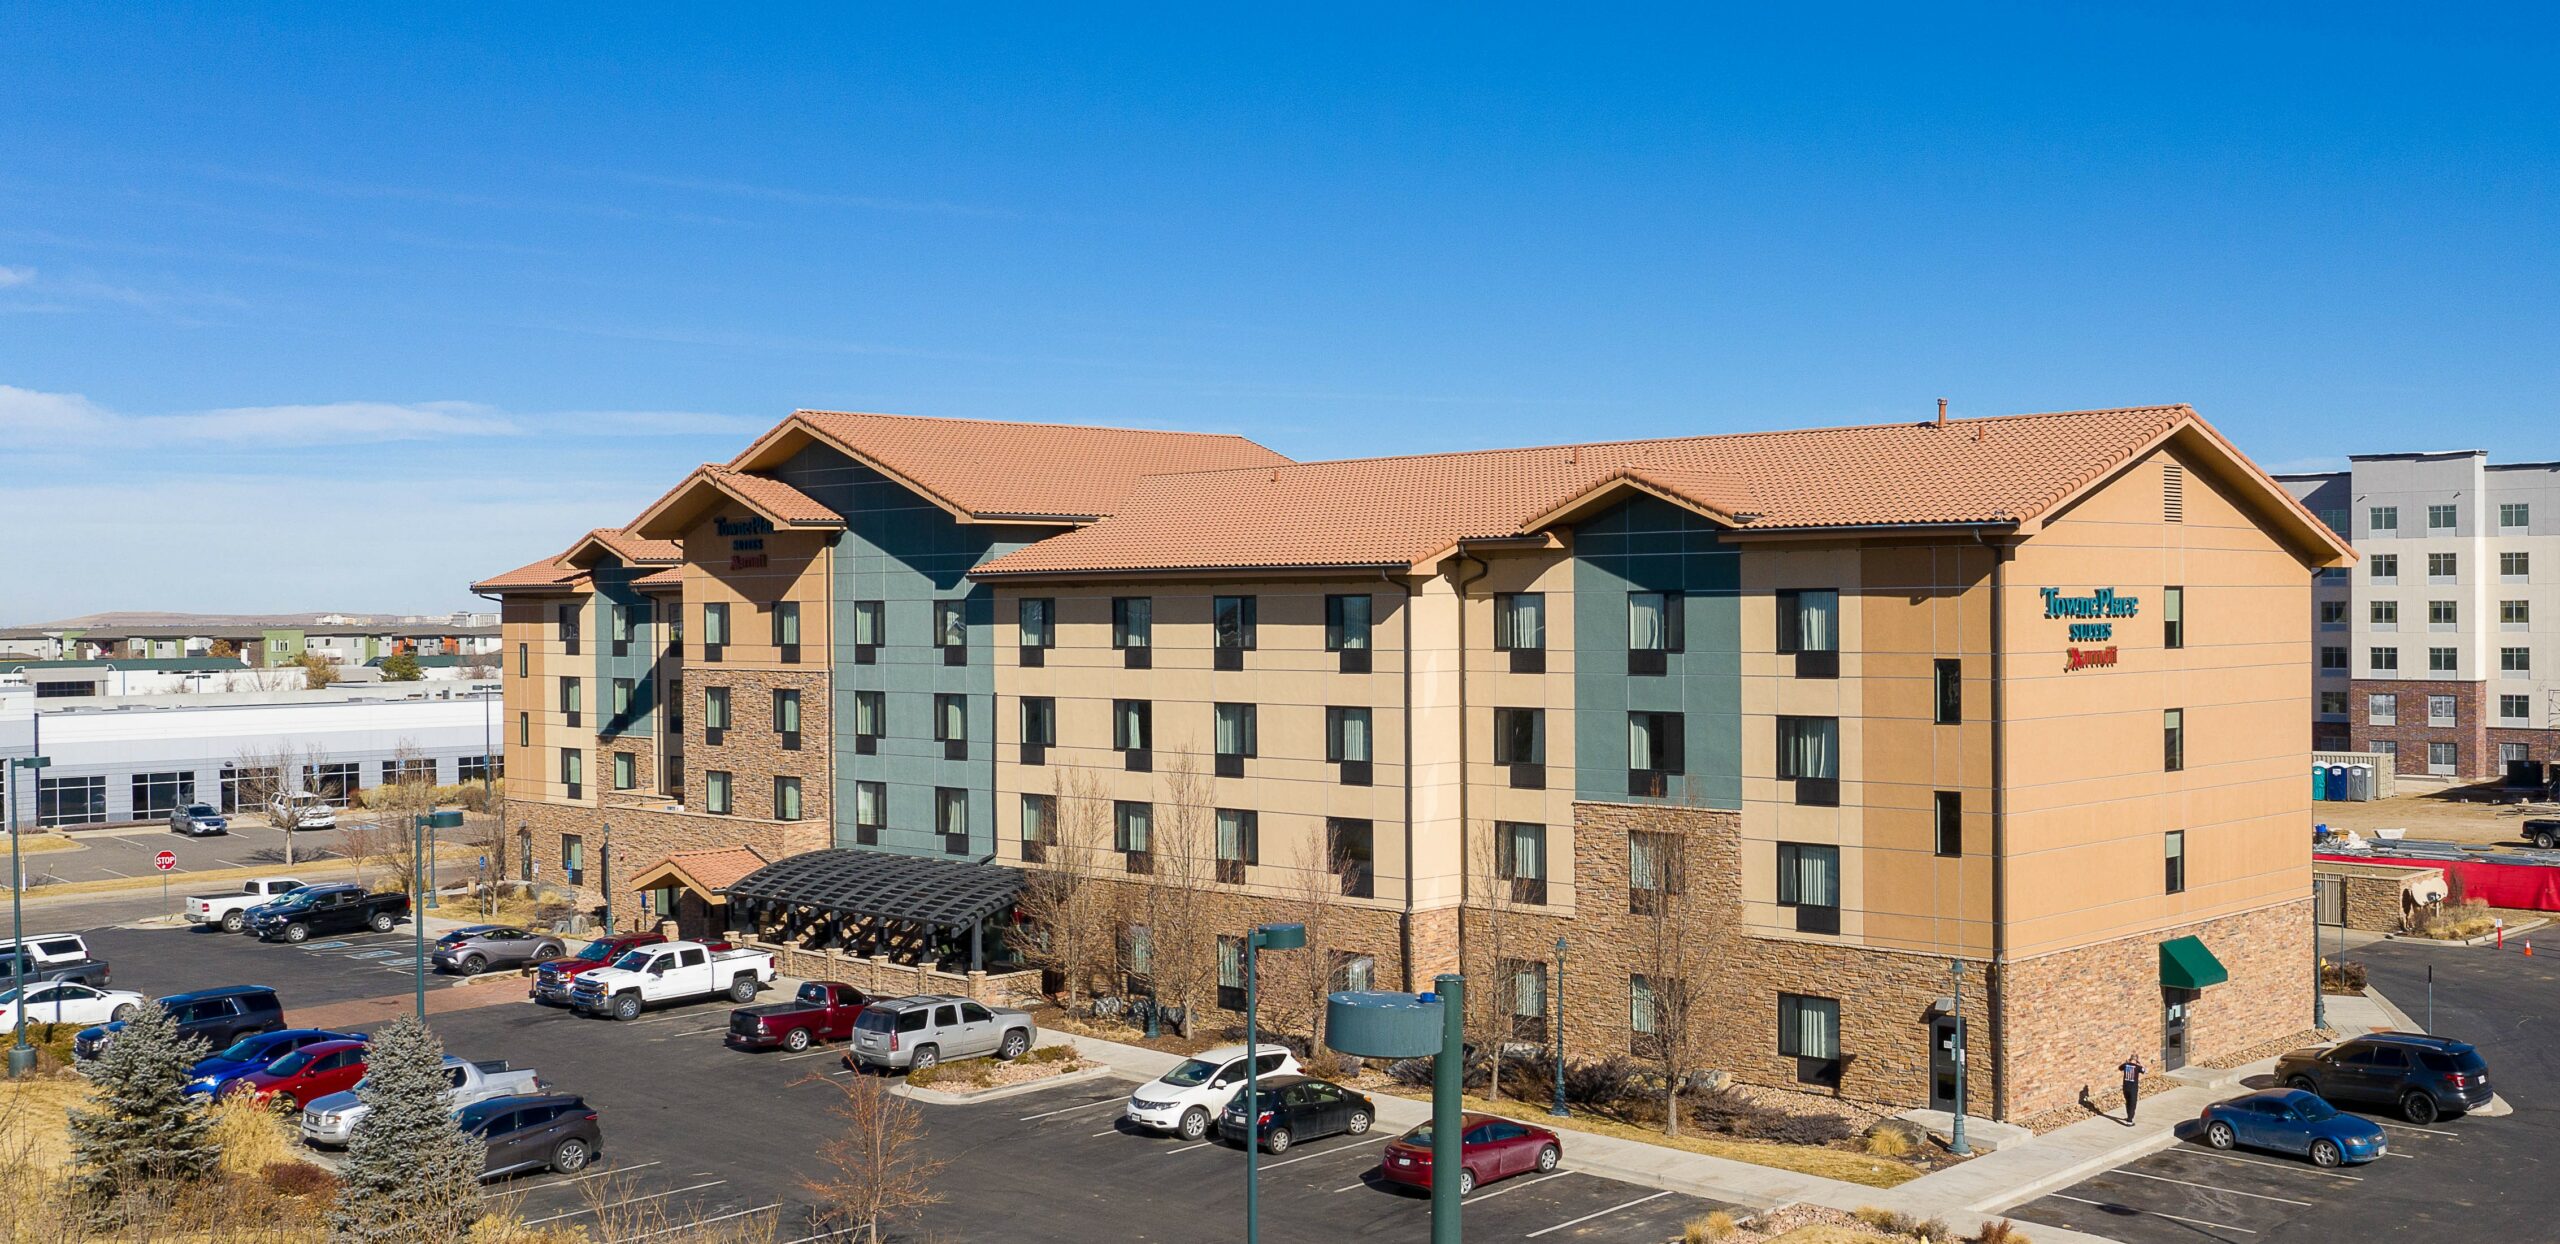 Pennbridge acquired the 99 room Marriott TownePlace Suites Denver Airport @ Gateway Park in May of 2021. The Hotel is located in the middle of Gateway Park which is only 4 miles from the Green Valley Ranch Golf Club, 6 miles from the Aurora Fox Arts Center, and 11 miles… Continue Reading..